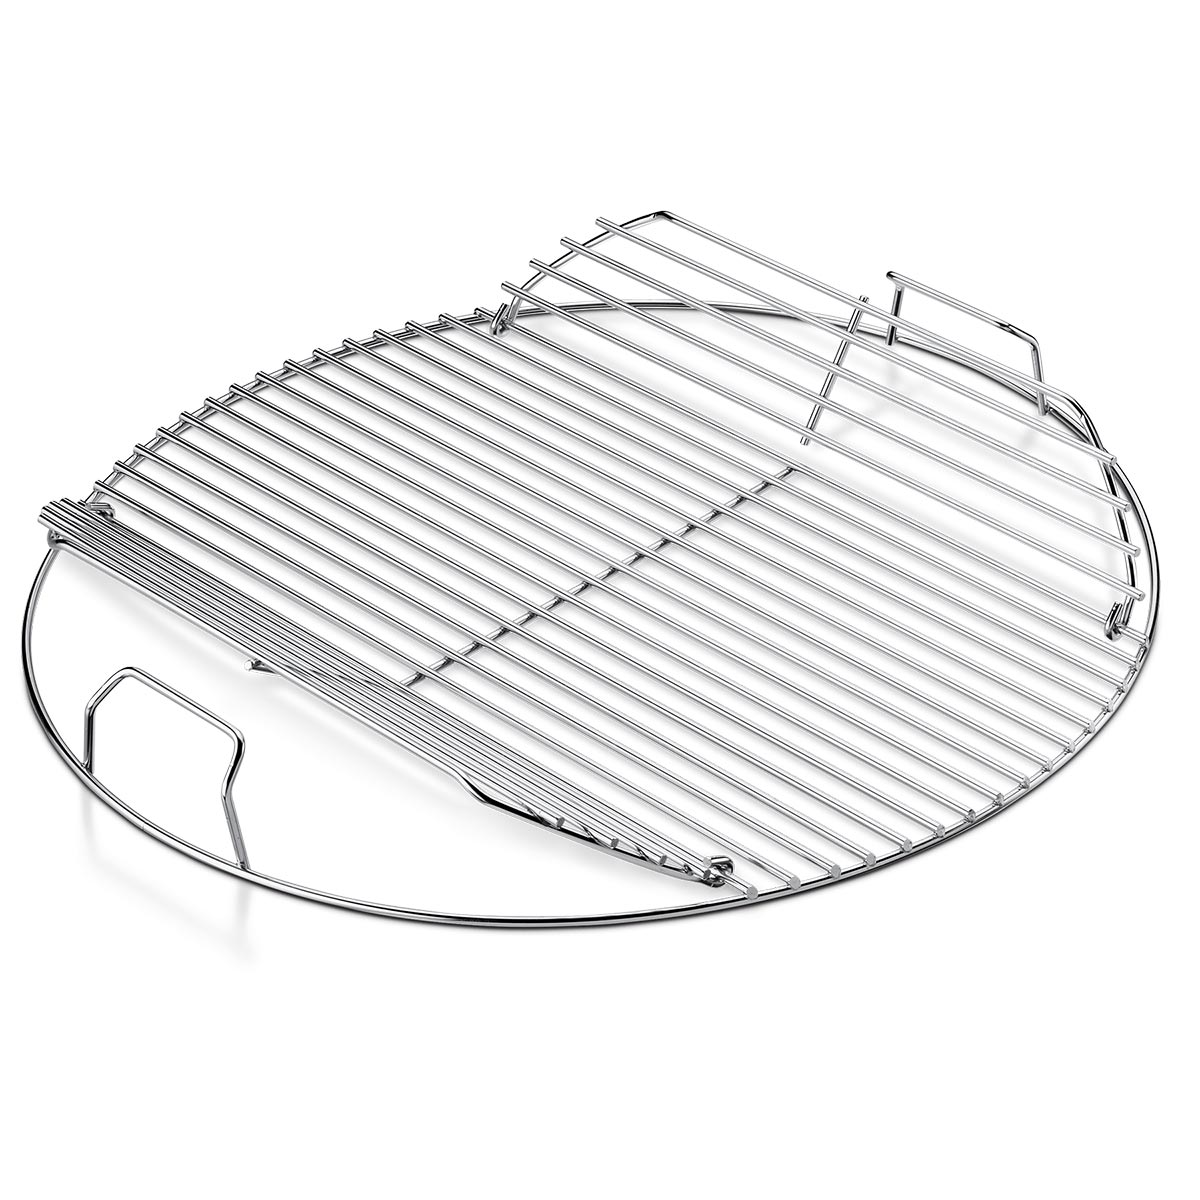 Weber 22in Hinged Cooking Grate 7436